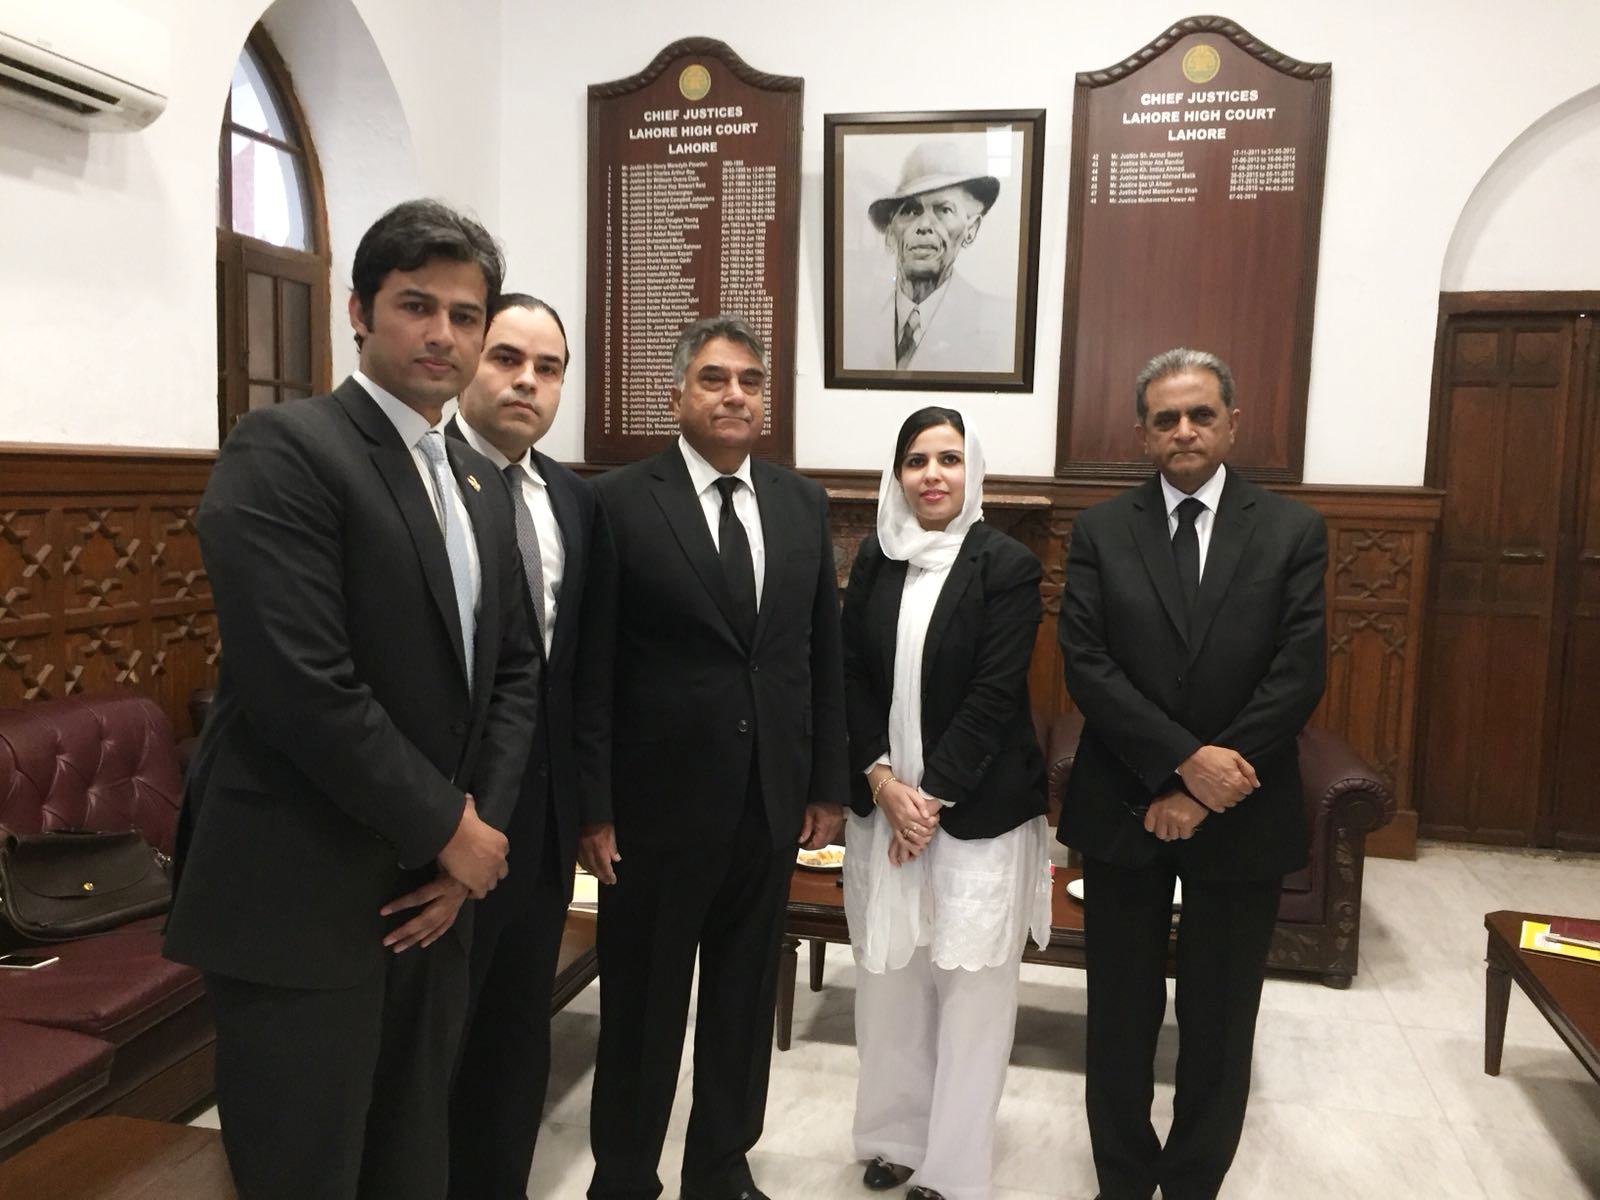 PJN Team Meeting with Chief Justice Lahore High Court